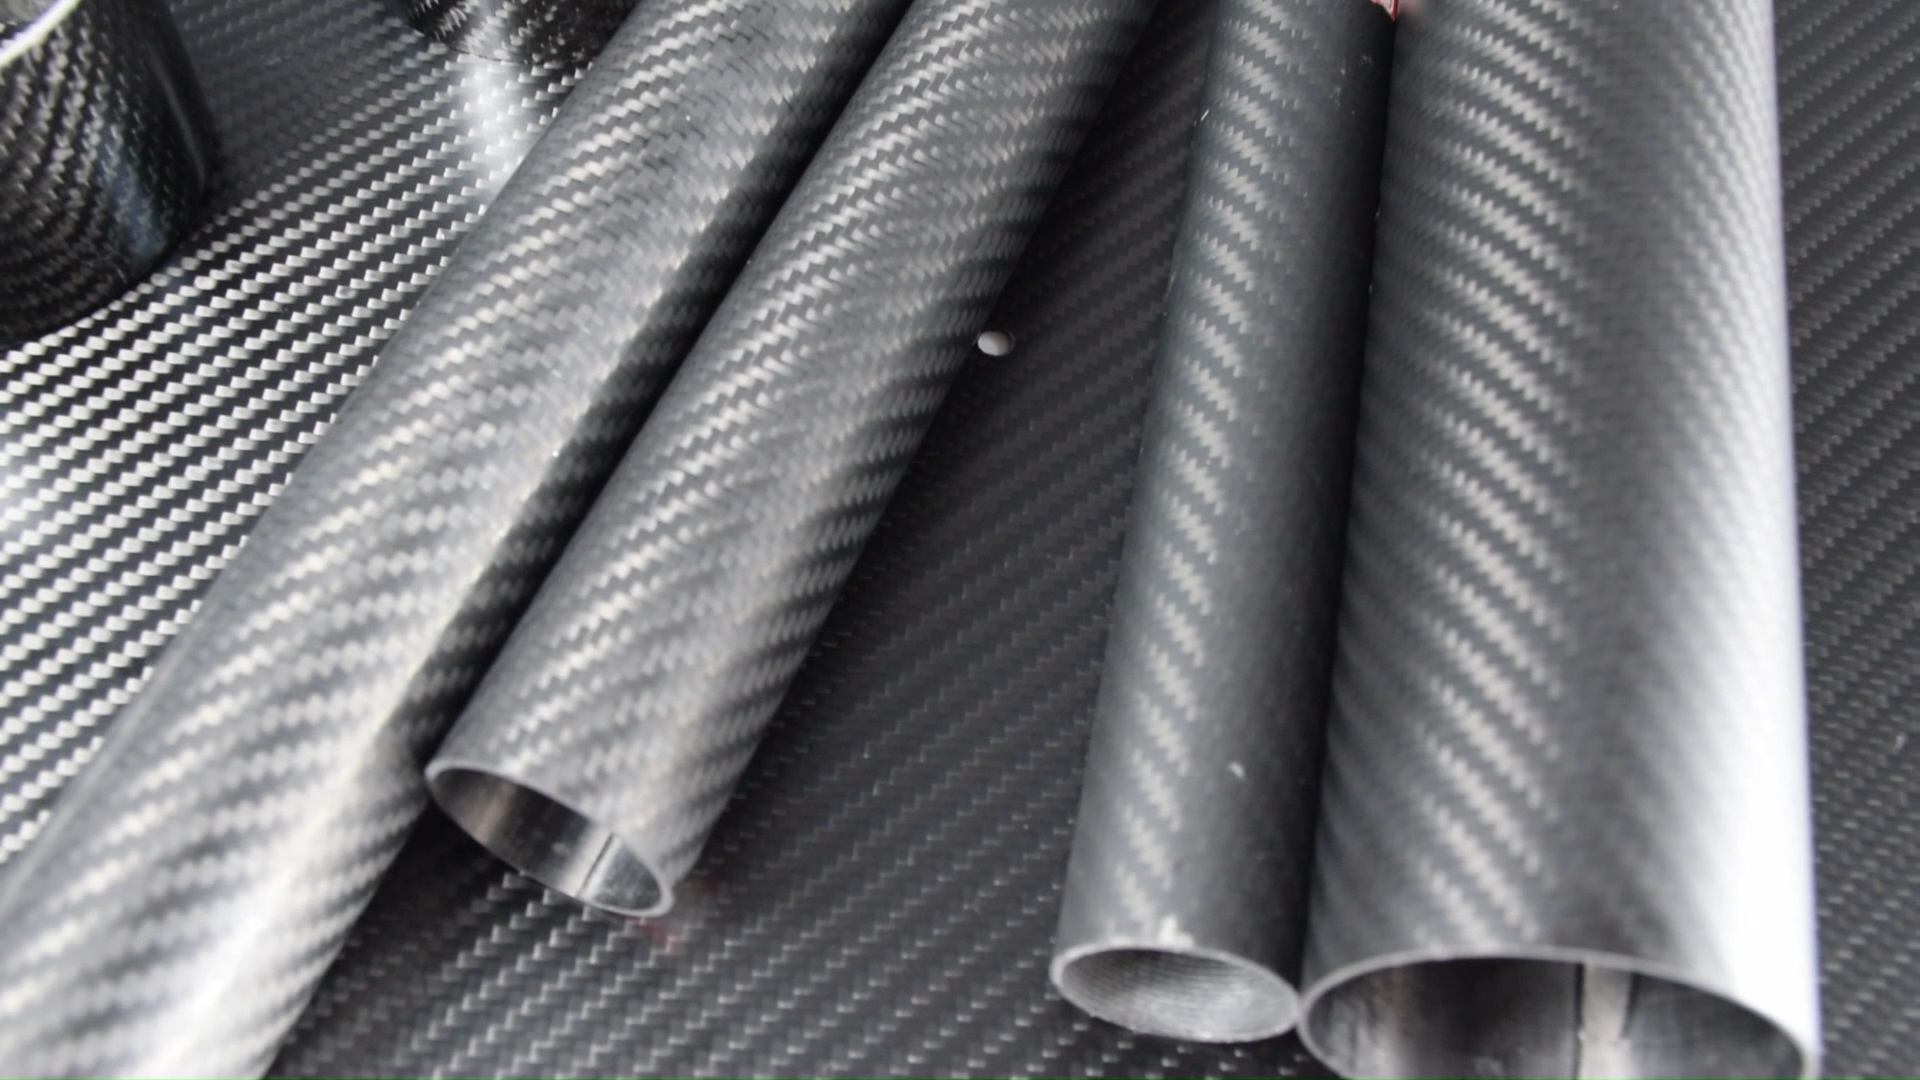 How Strong is Carbon Fiber? Your Guide to Knowing Just How Strong Carbon  Fiber Can Be